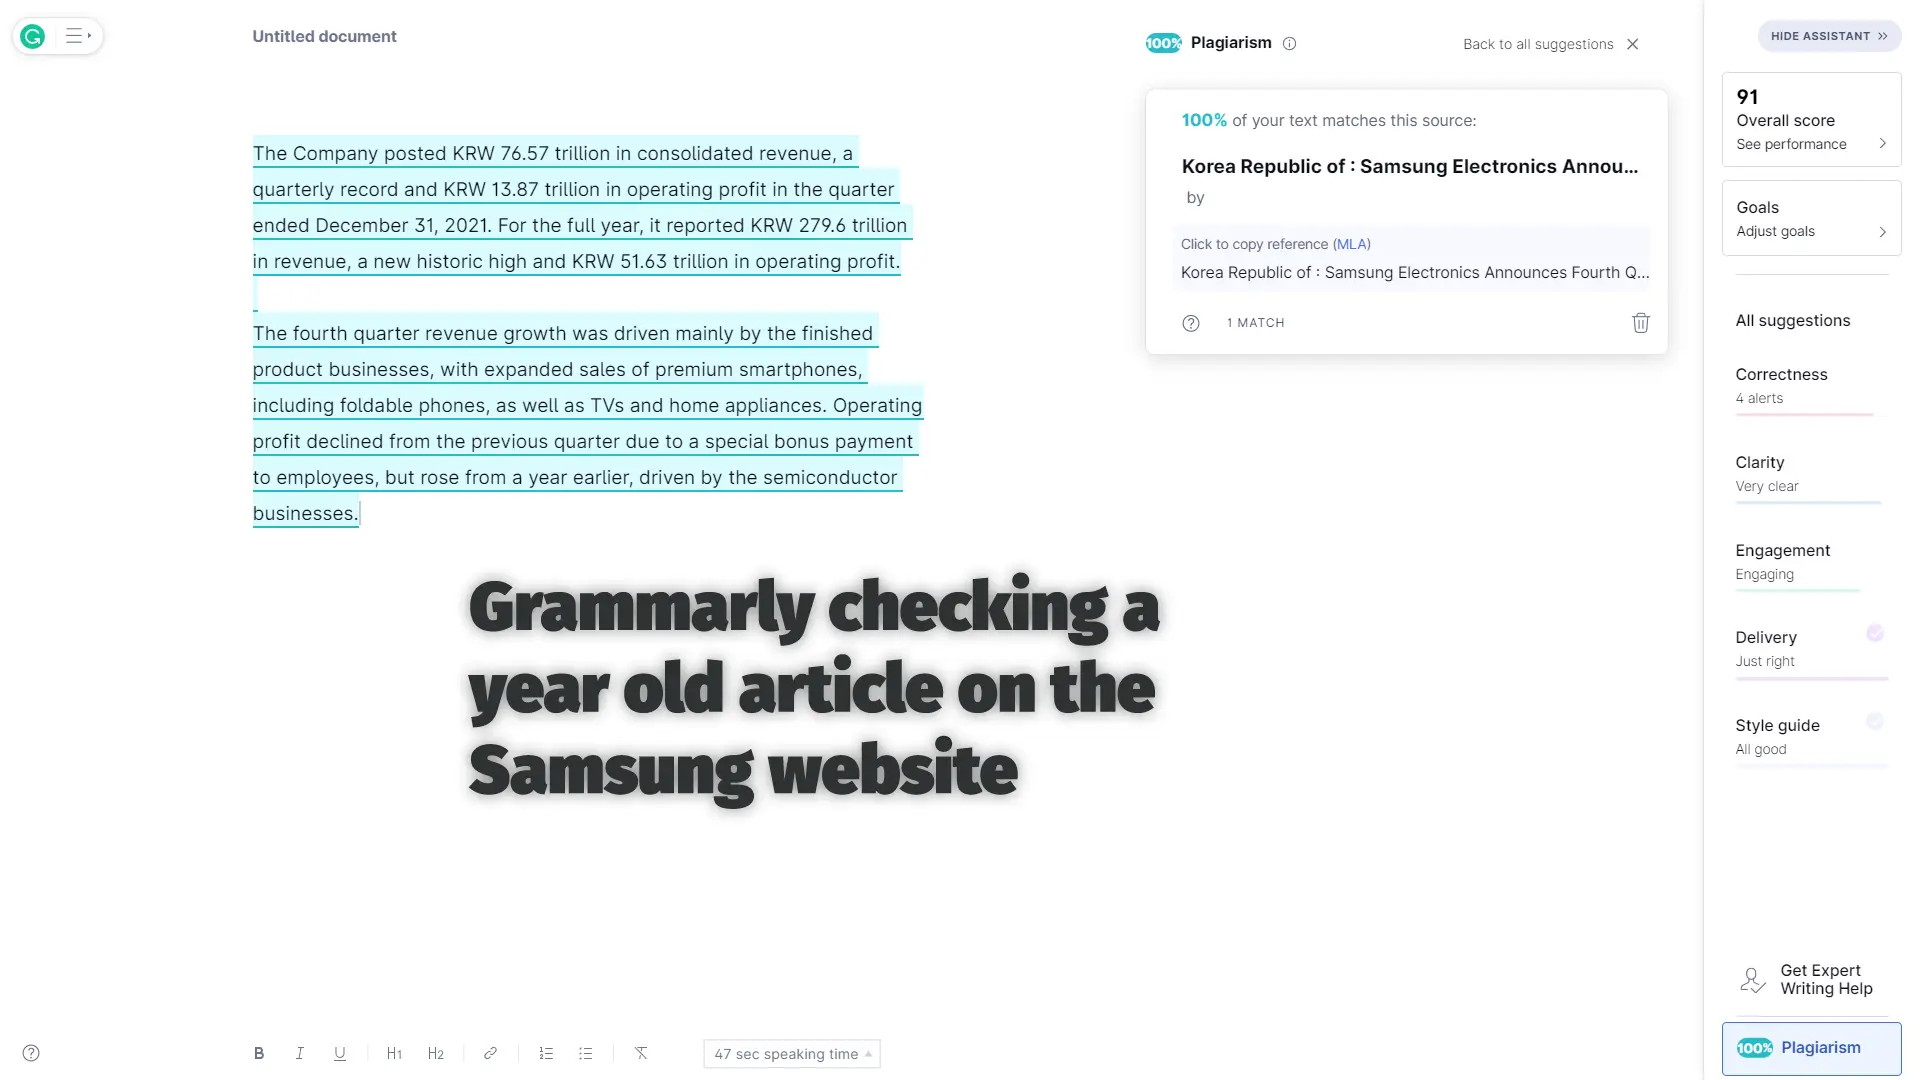 Grammarly Checking a Year Old Article on the Samsung Website